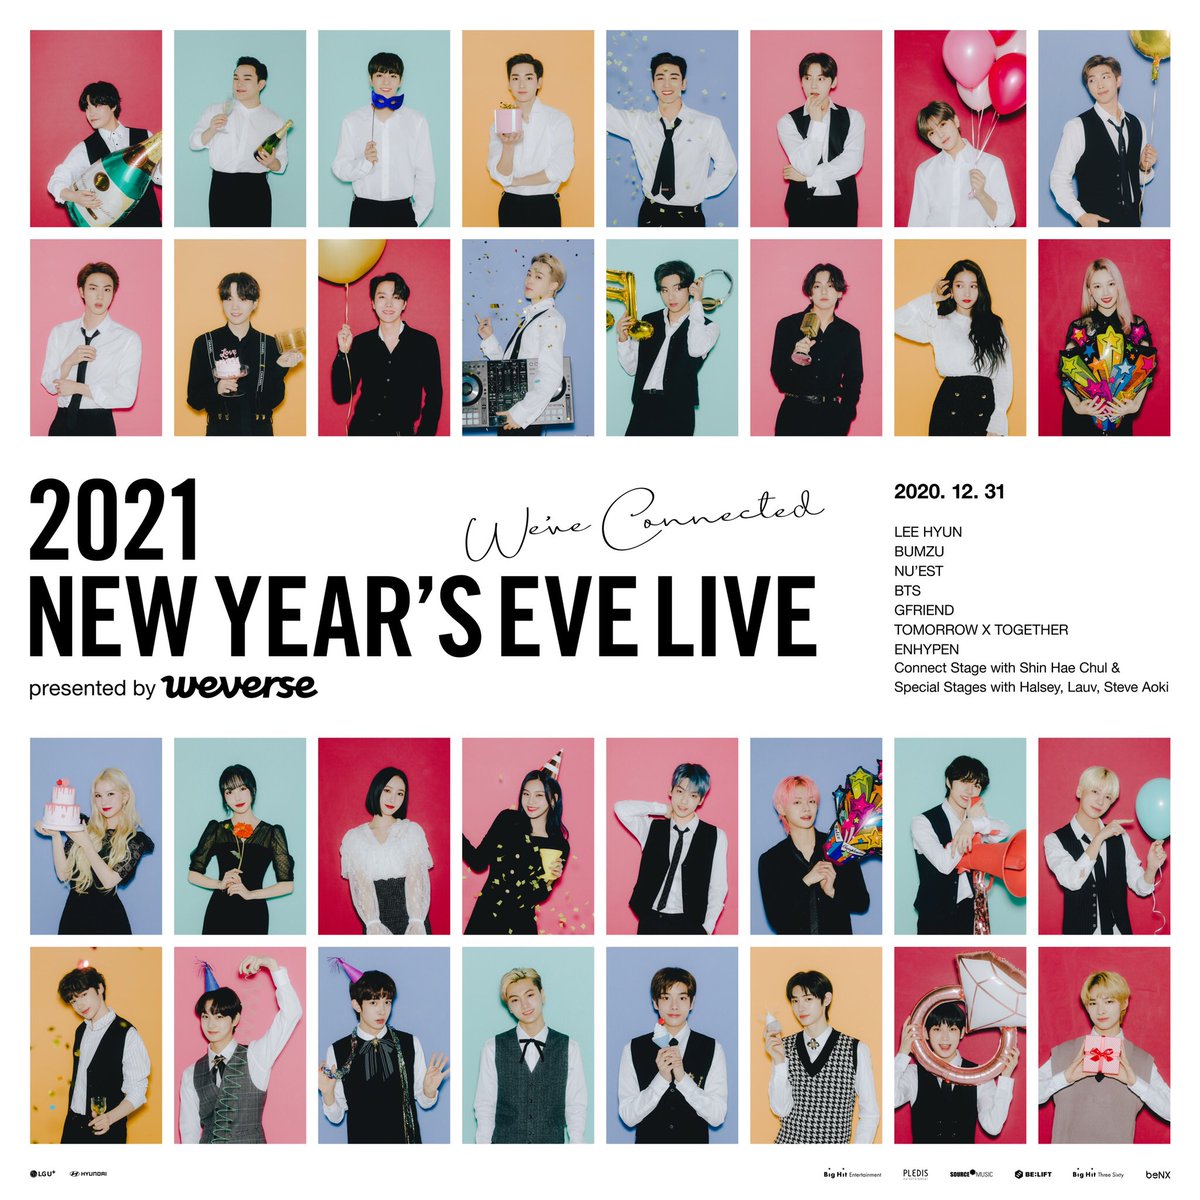 NEW YEAR'S EVE LIVE ENHYPEN チケット NYEL